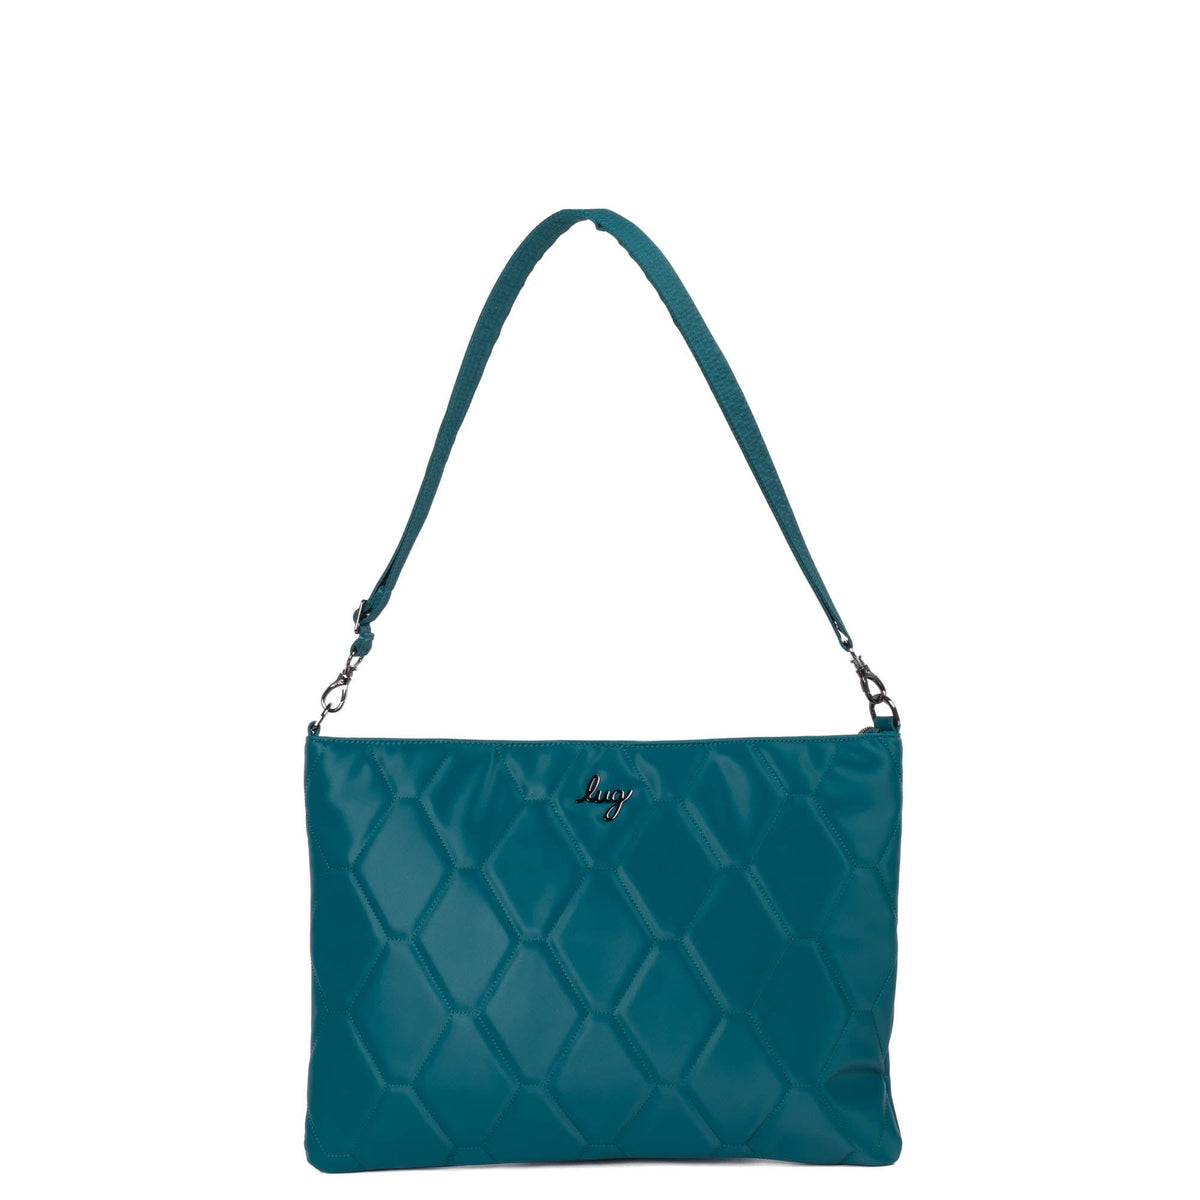 Under One Sky Teal Faux Leather Crossbody Purse